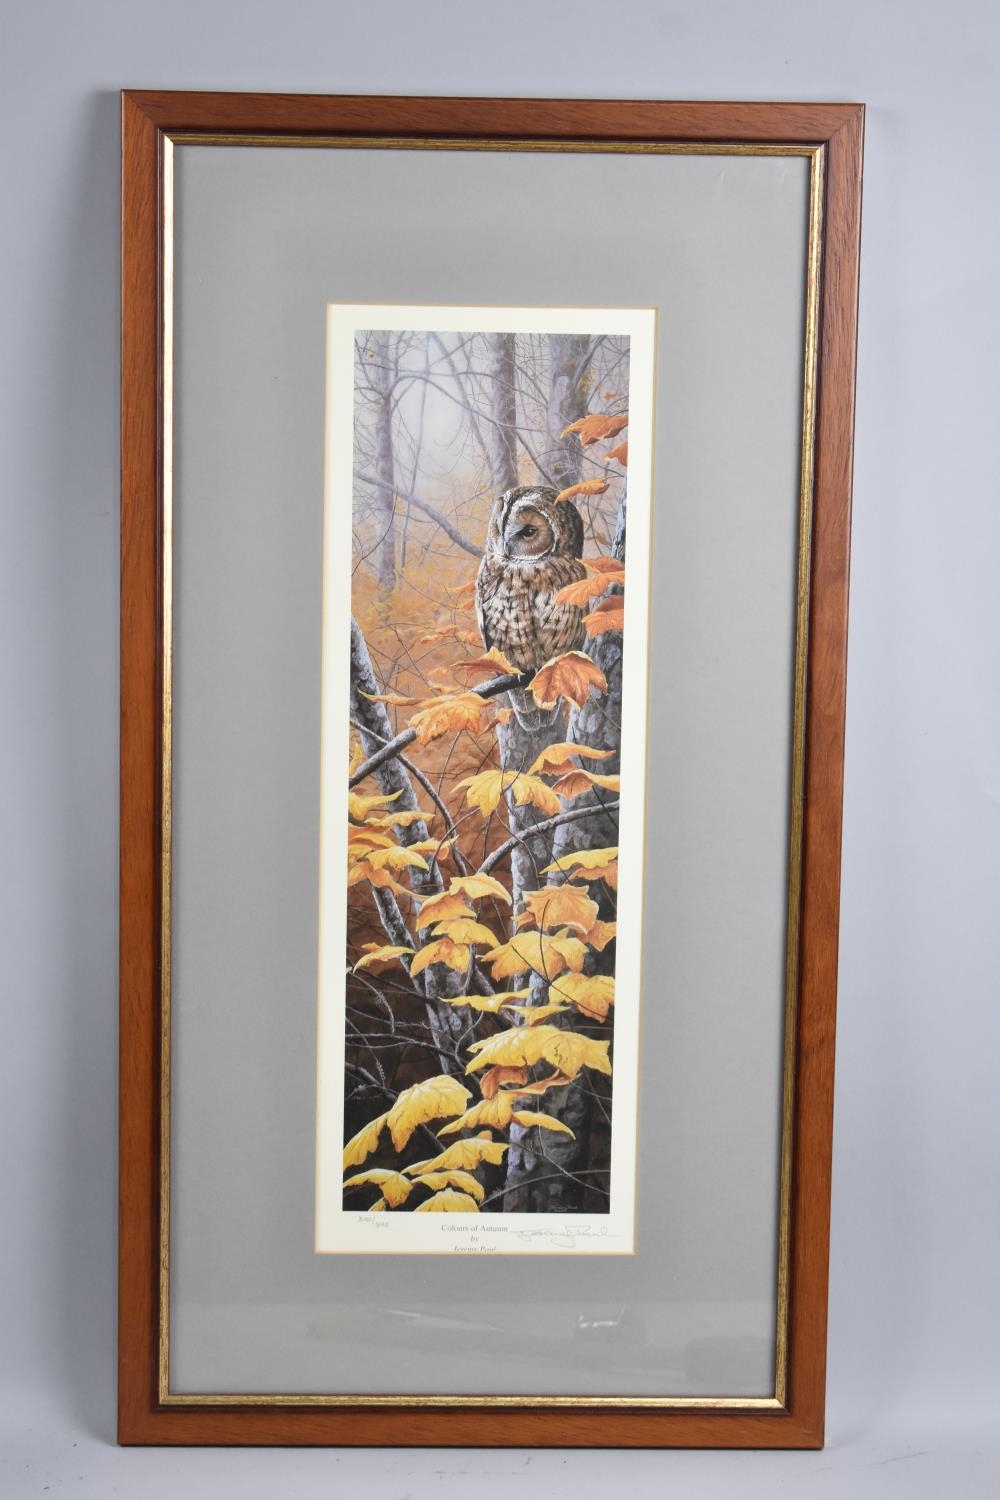 A Framed Limited Edition Print, Colours of Autumn by Jeremy Paul, Signed and Numbered 310/395,